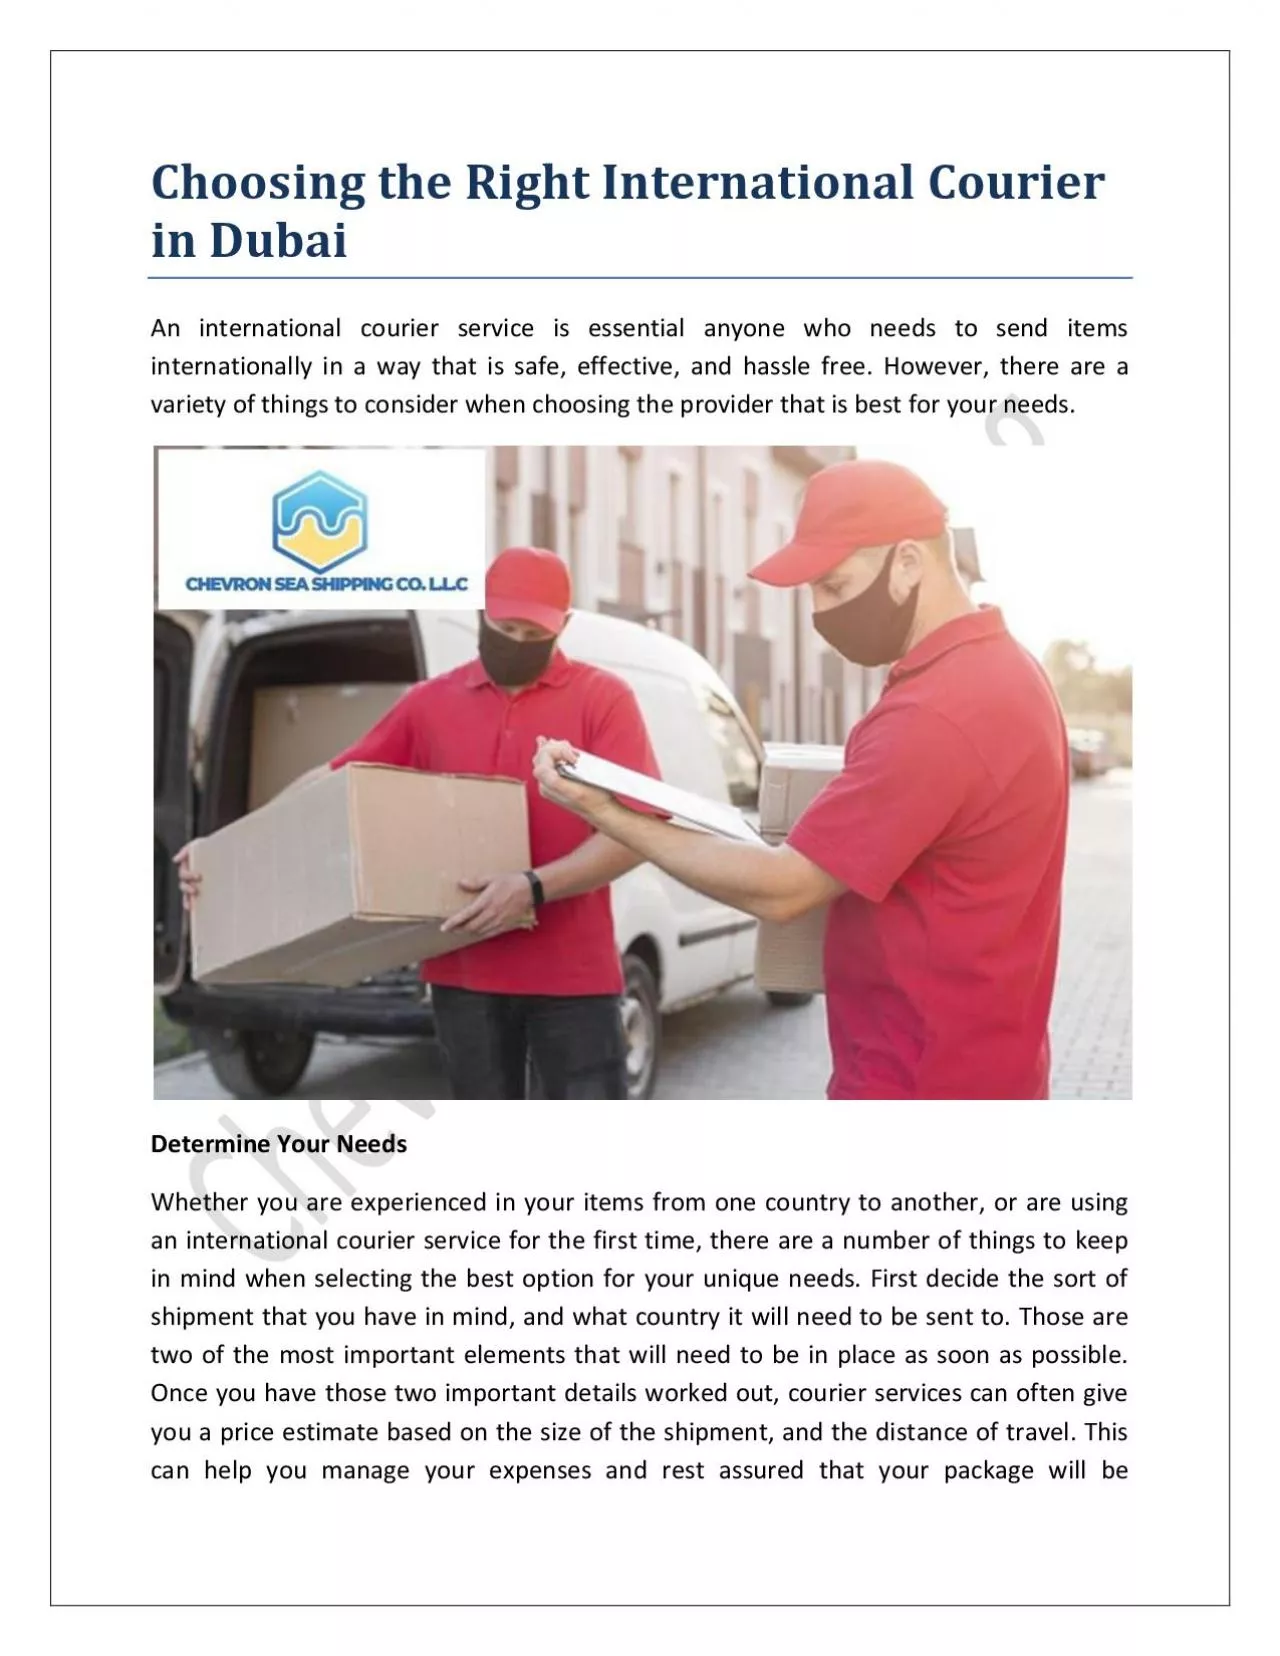 Choosing the Right International Courier in Dubai